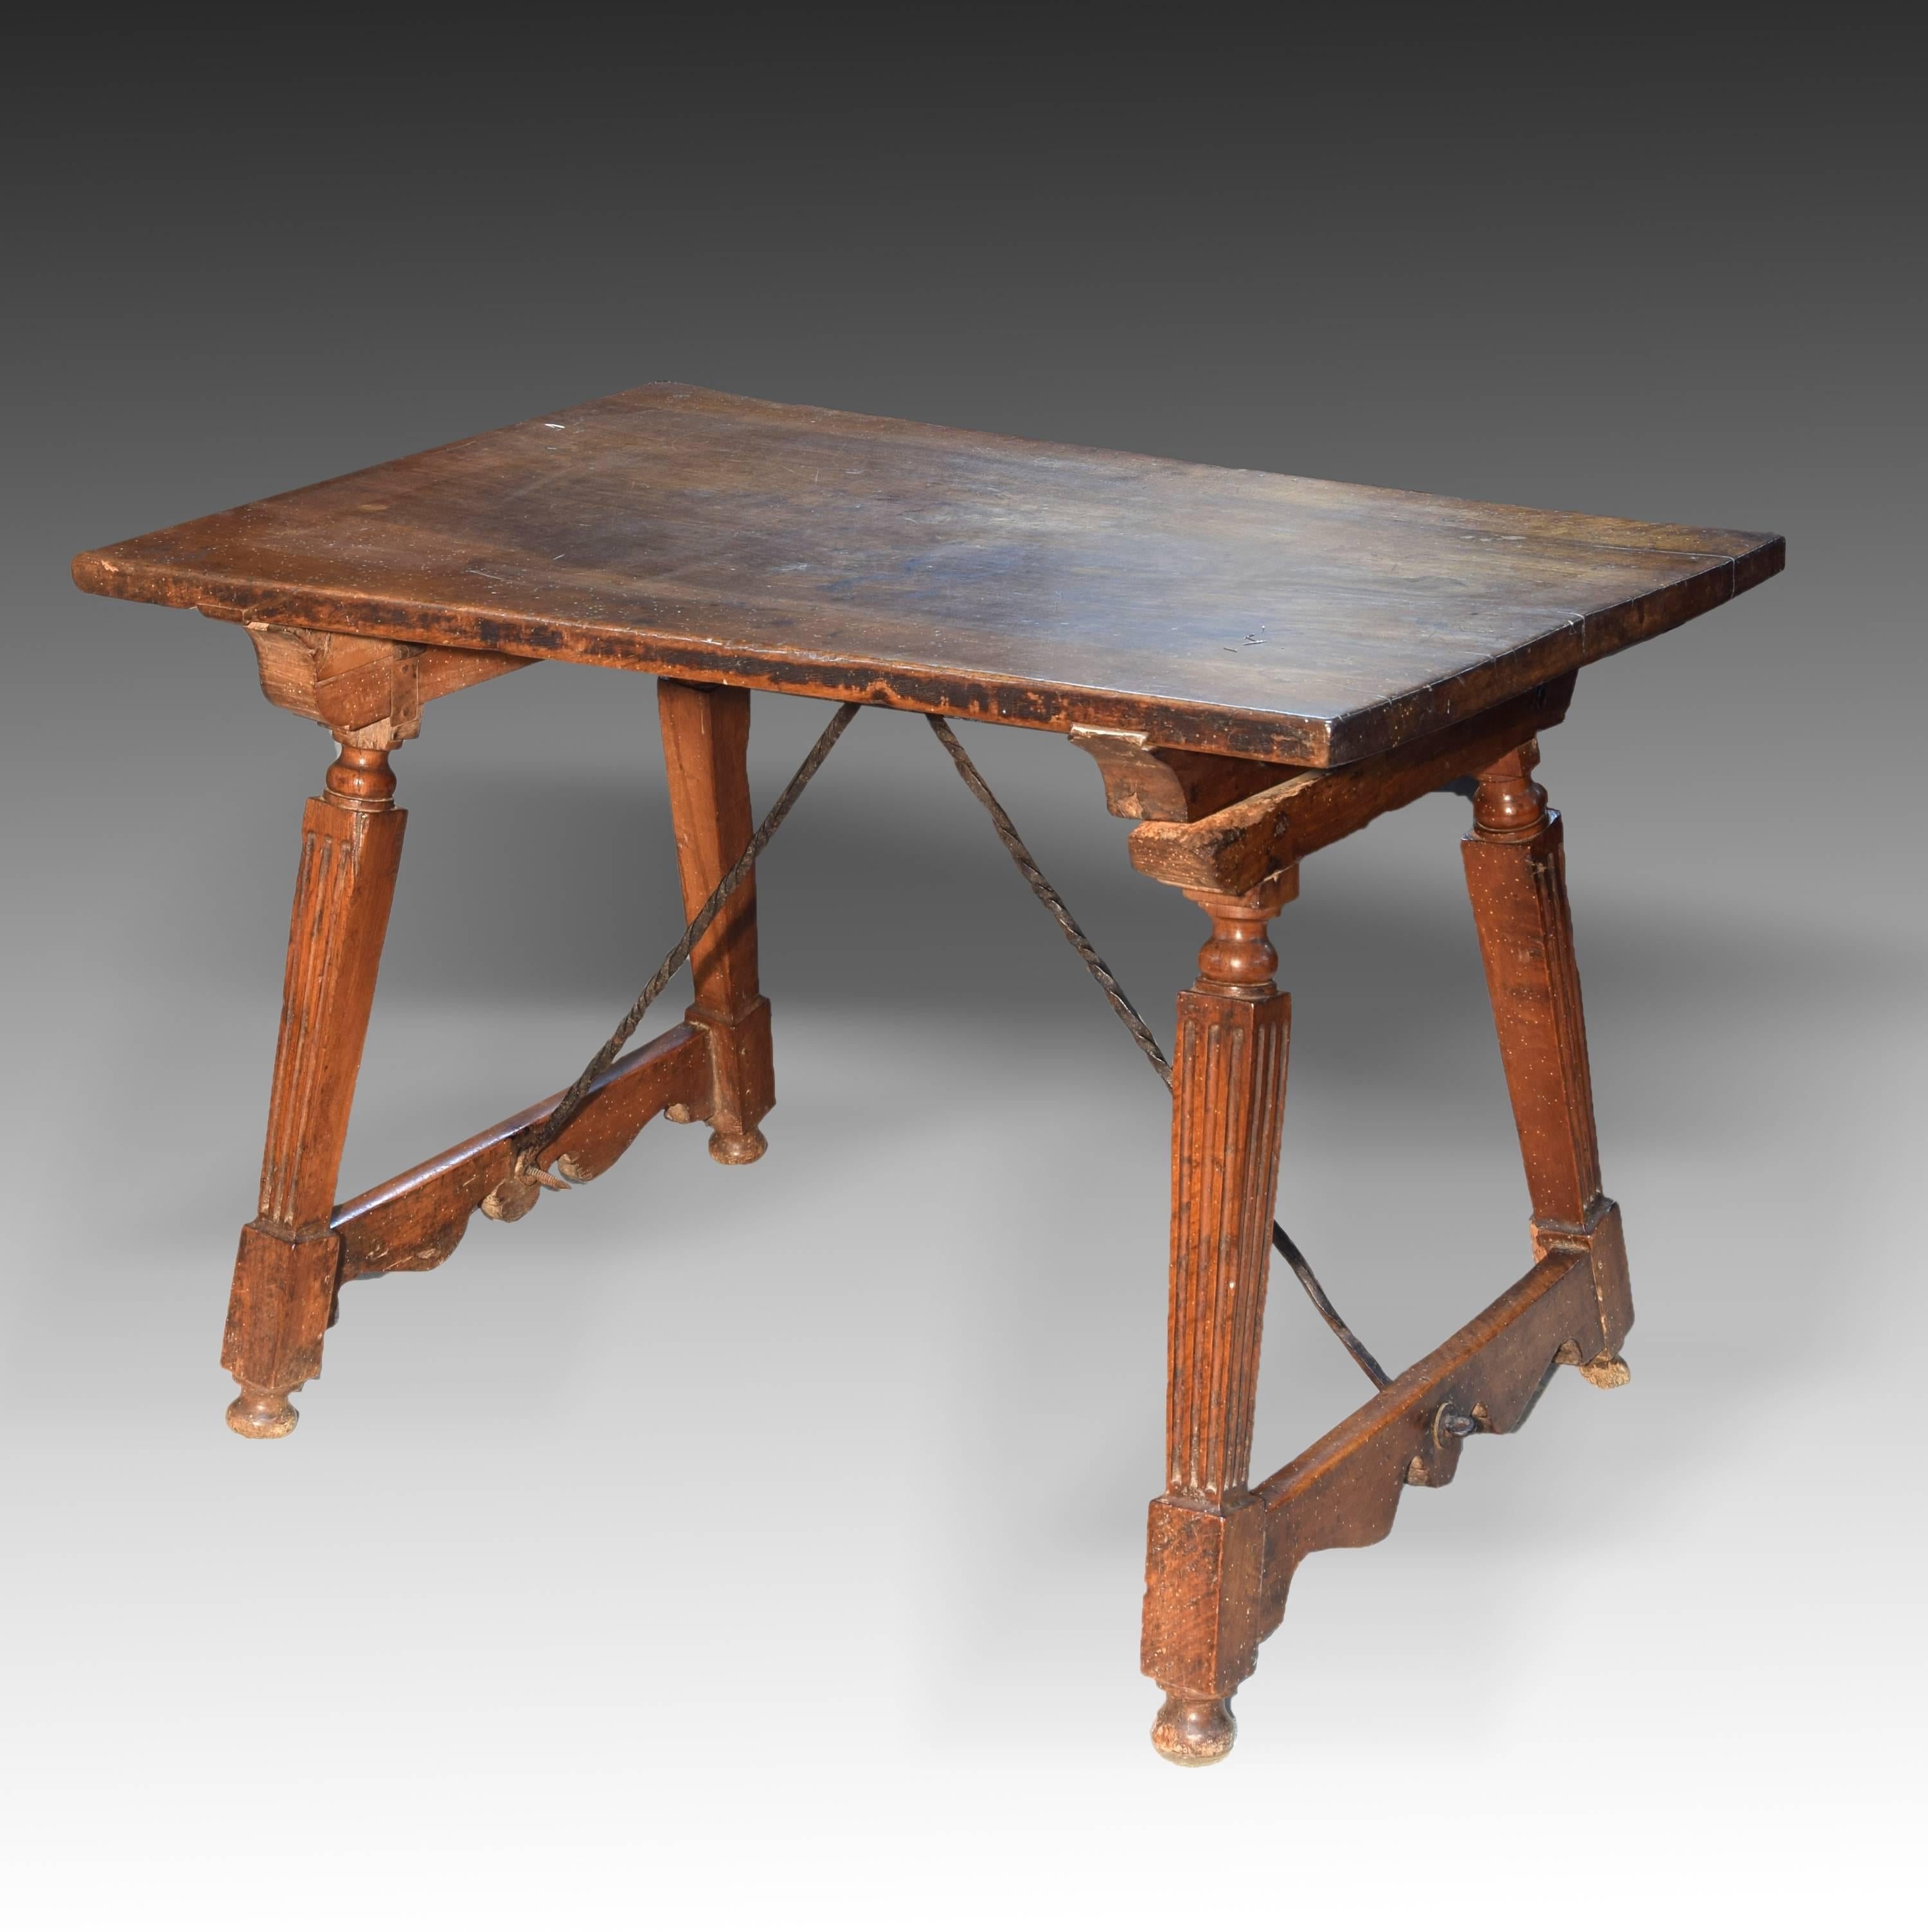 Rectangular board table ready on four legs in the shape of pillars with grooved shaft and square section placed on balls and joined in a dice, two to two, by lower chambranes cut in one of its profiles. The supports are secured to the table by means